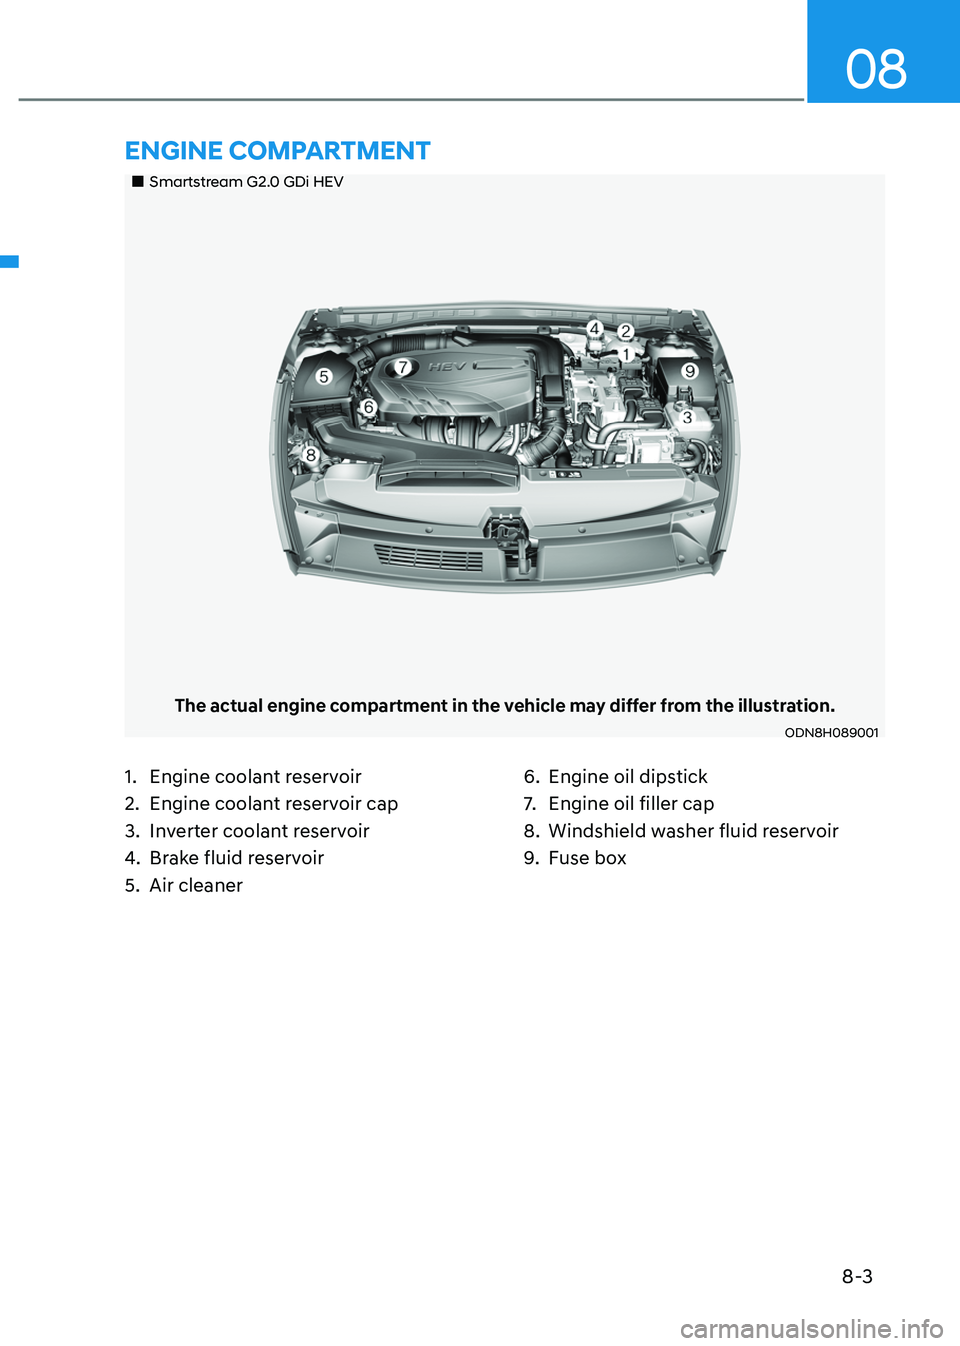 HYUNDAI SONATA HYBRID 2022 User Guide 8-3
08
„„Smartstream G2.0 GDi HEV
The actual engine compartment in the vehicle may differ from the illustration.
ODN8H089001
1. Engine coolant reservoir
2. Engine coolant reservoir cap
3. In